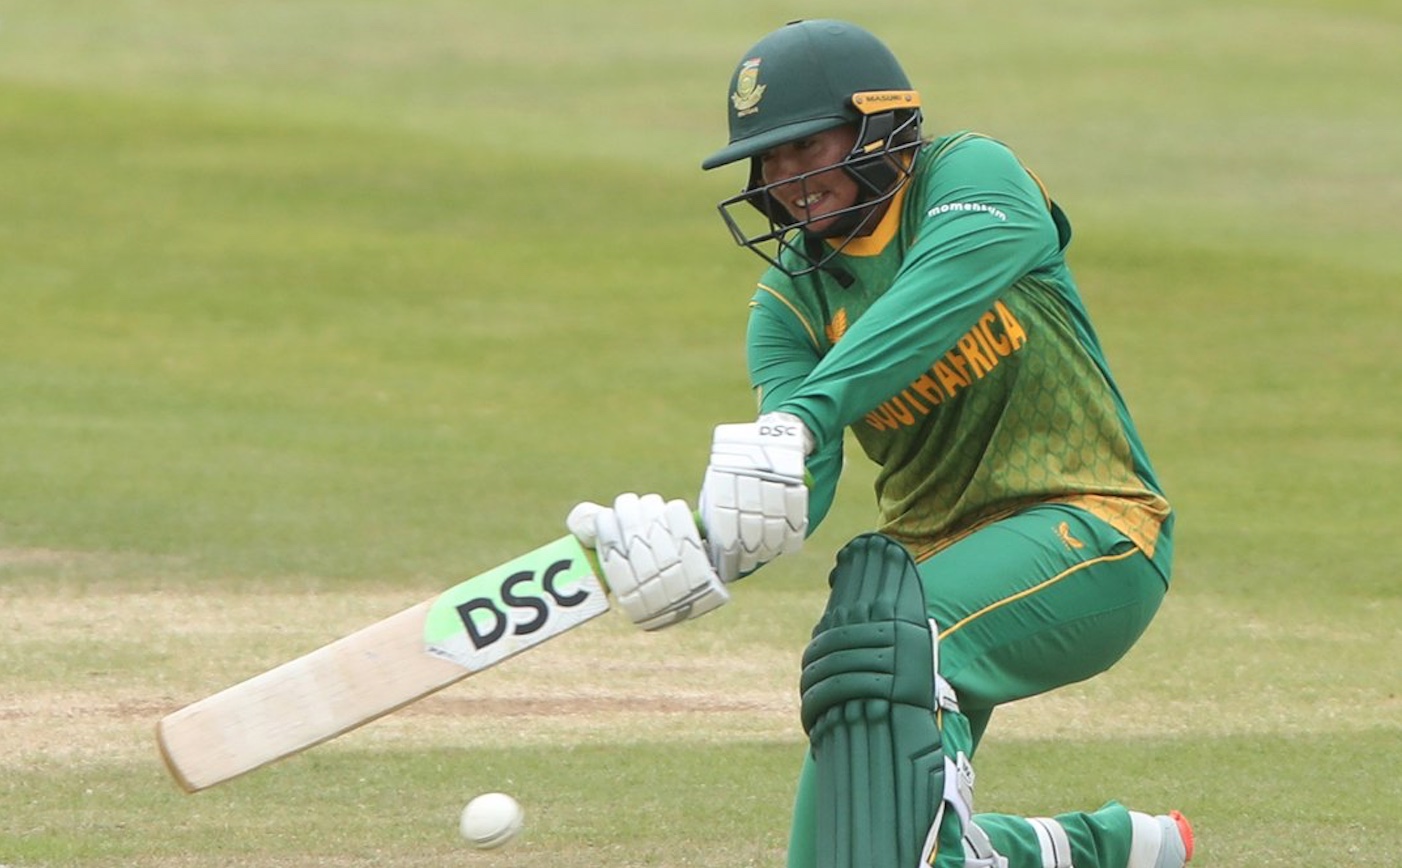 IRE-W vs SA-W: South Africa wrap up ODI series with convincing win at Clontarf